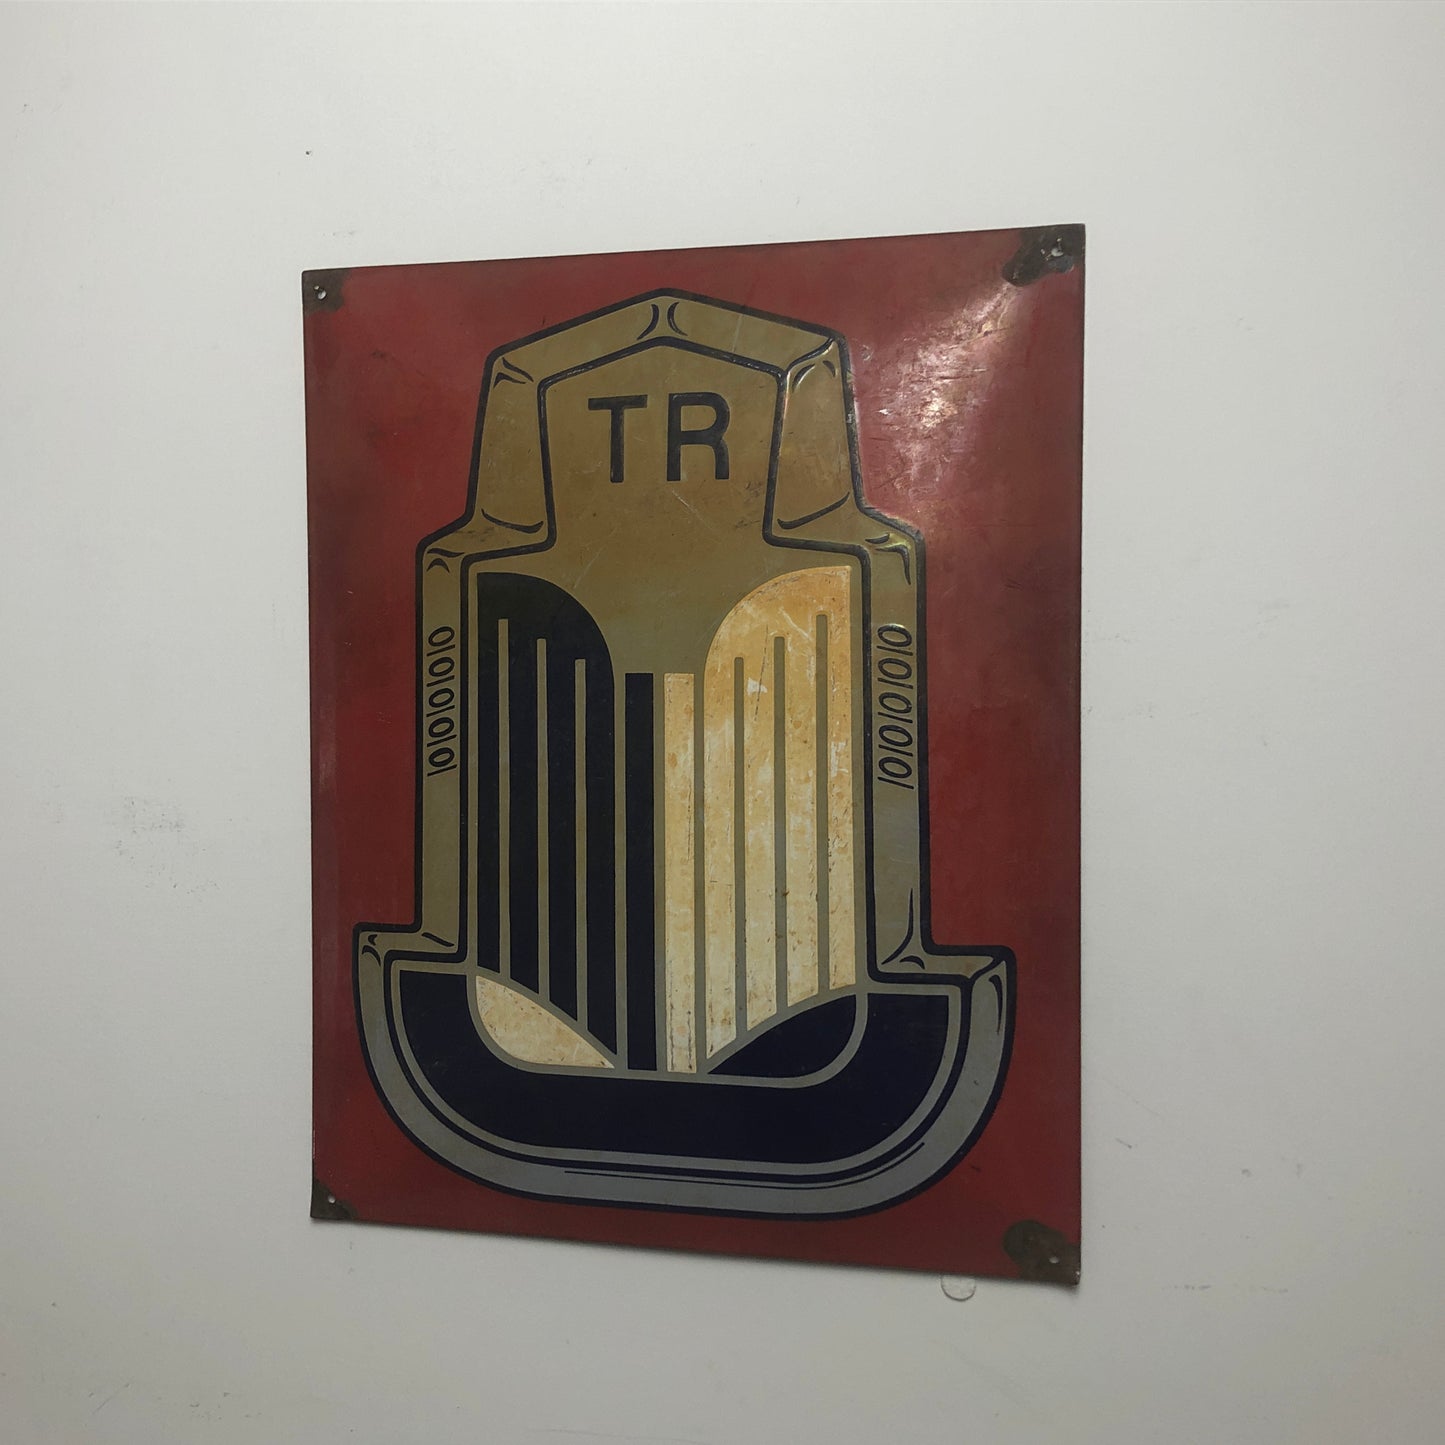 Triumph, Original Triumph TR Enamelled Sign with Patina and Signs of Time